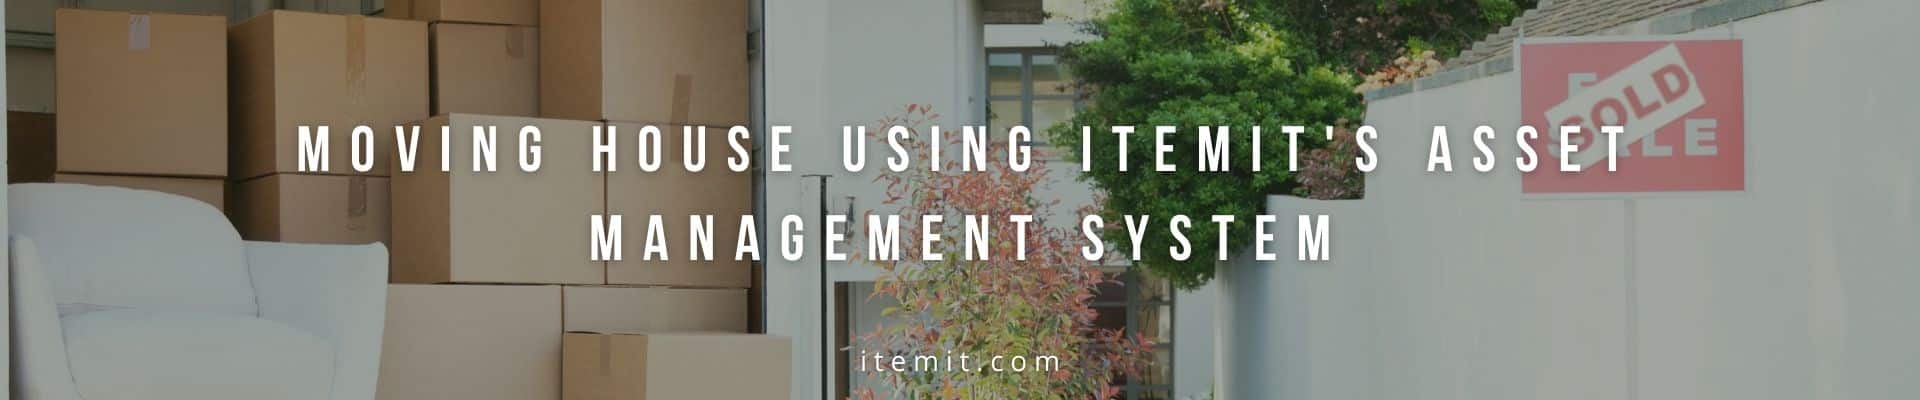 Moving House Using itemit's Asset Management System